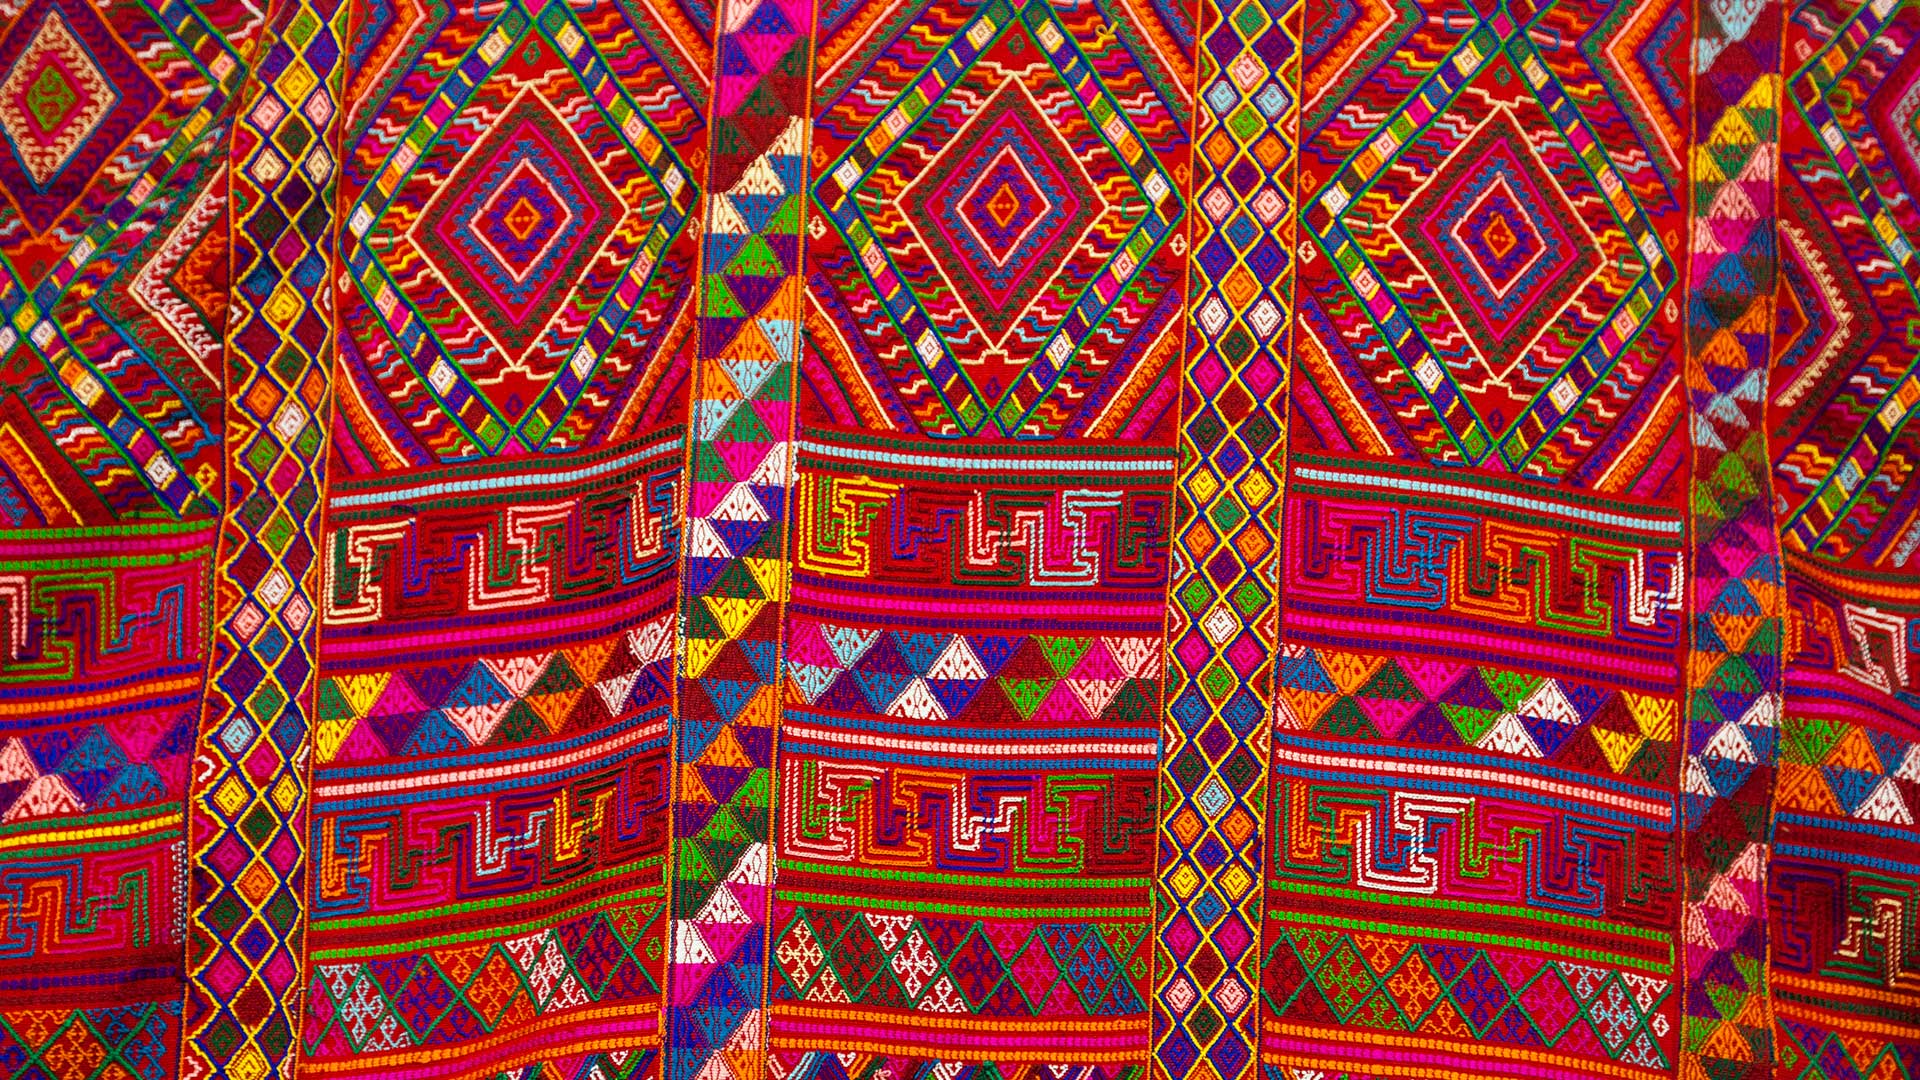 Woven textiles used for a kira, the traditional dress in Bhutan